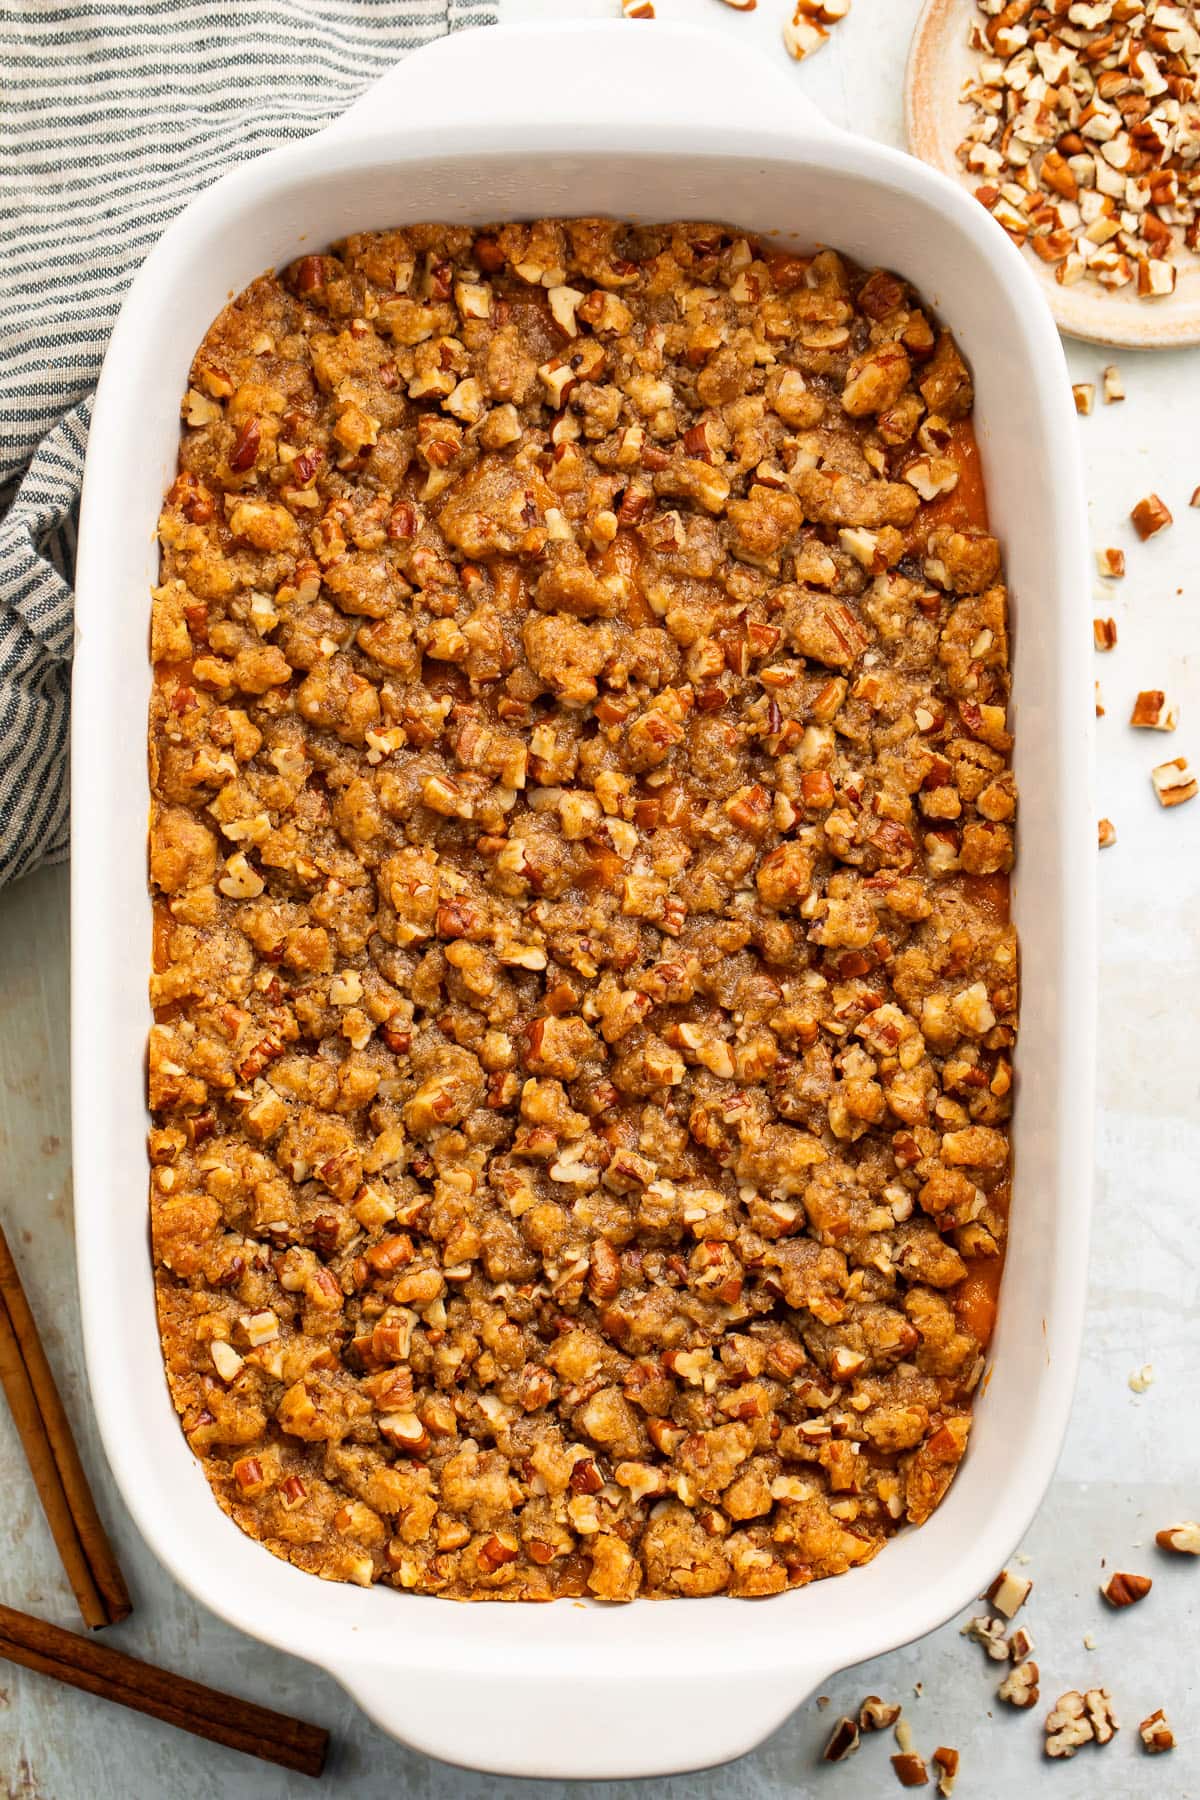 A casserole dish of Ruth's Chris sweet potato casserole topped with pecans and brown sugar.